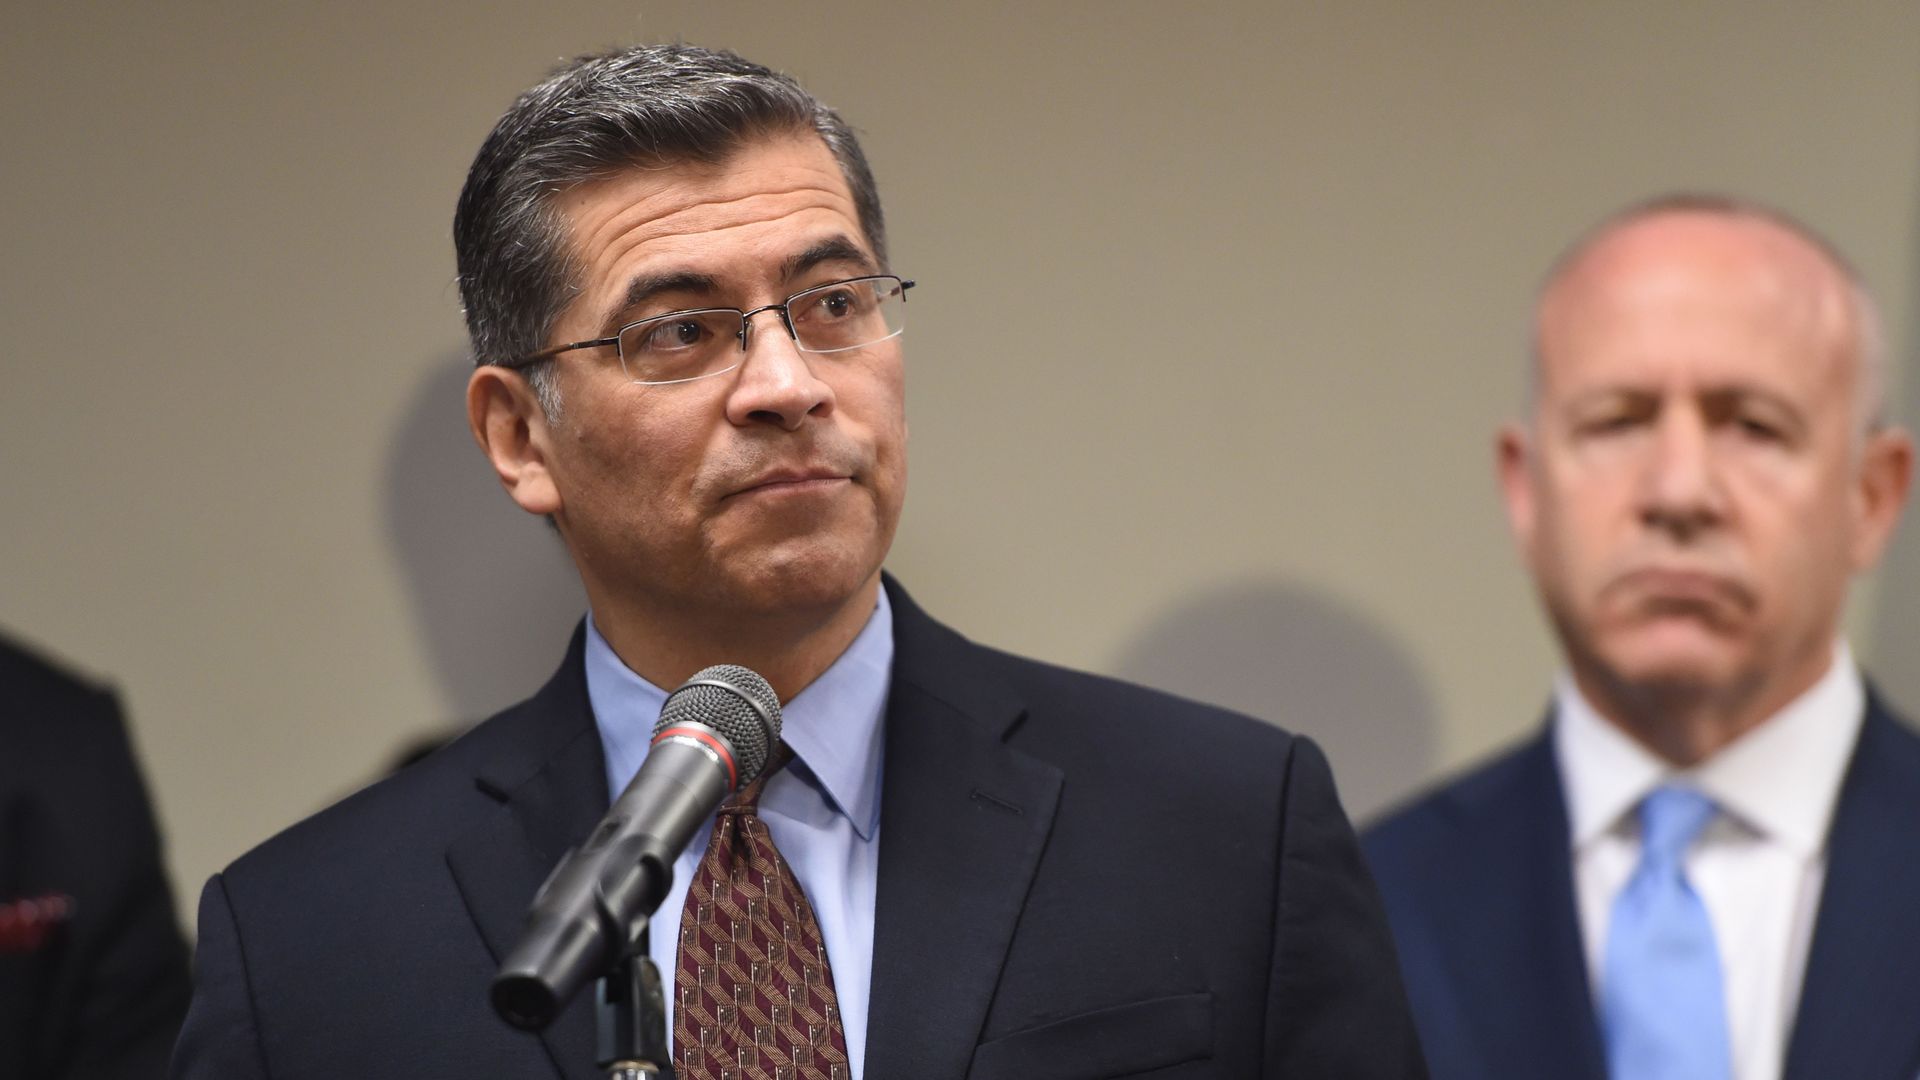 California Attorney General Xavier Becerra speaks at a press conference